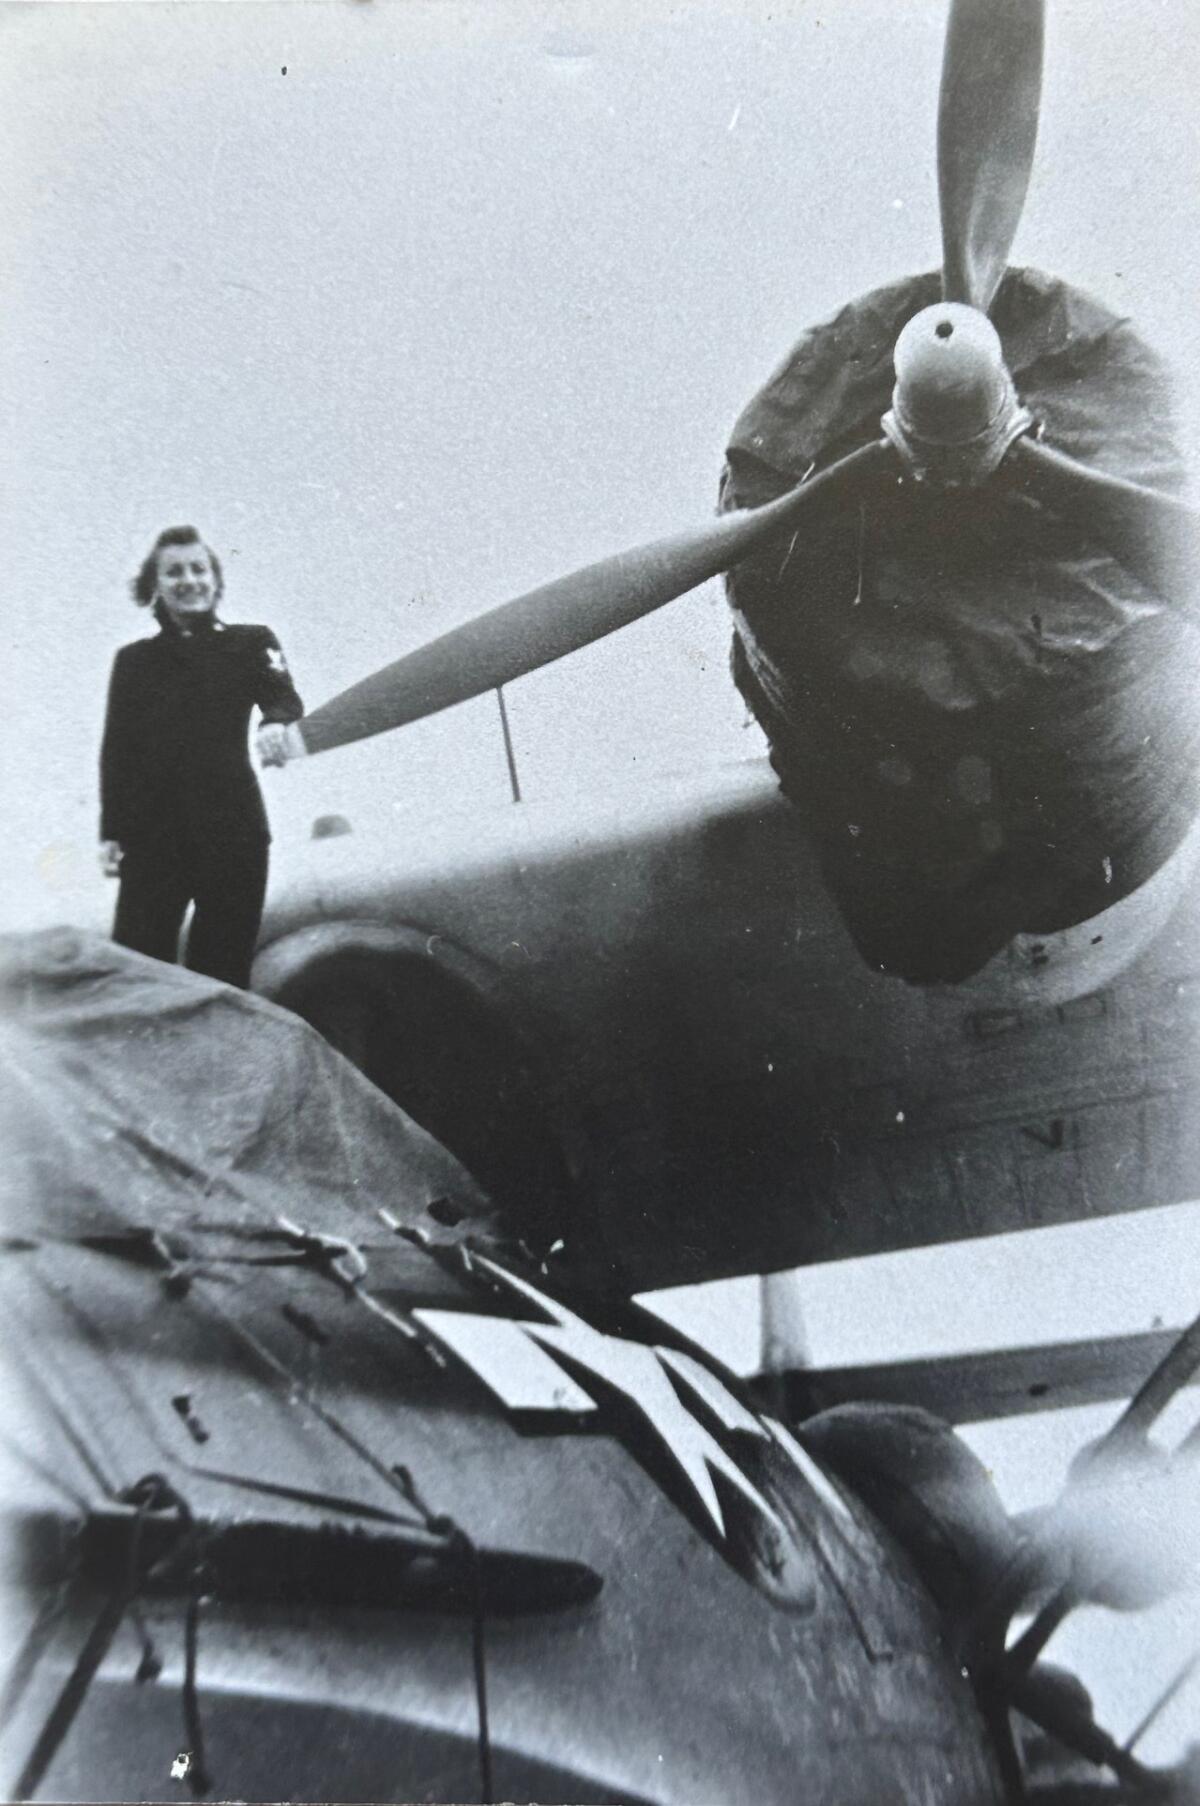 A young woman stands next to the propeller of a large plane.